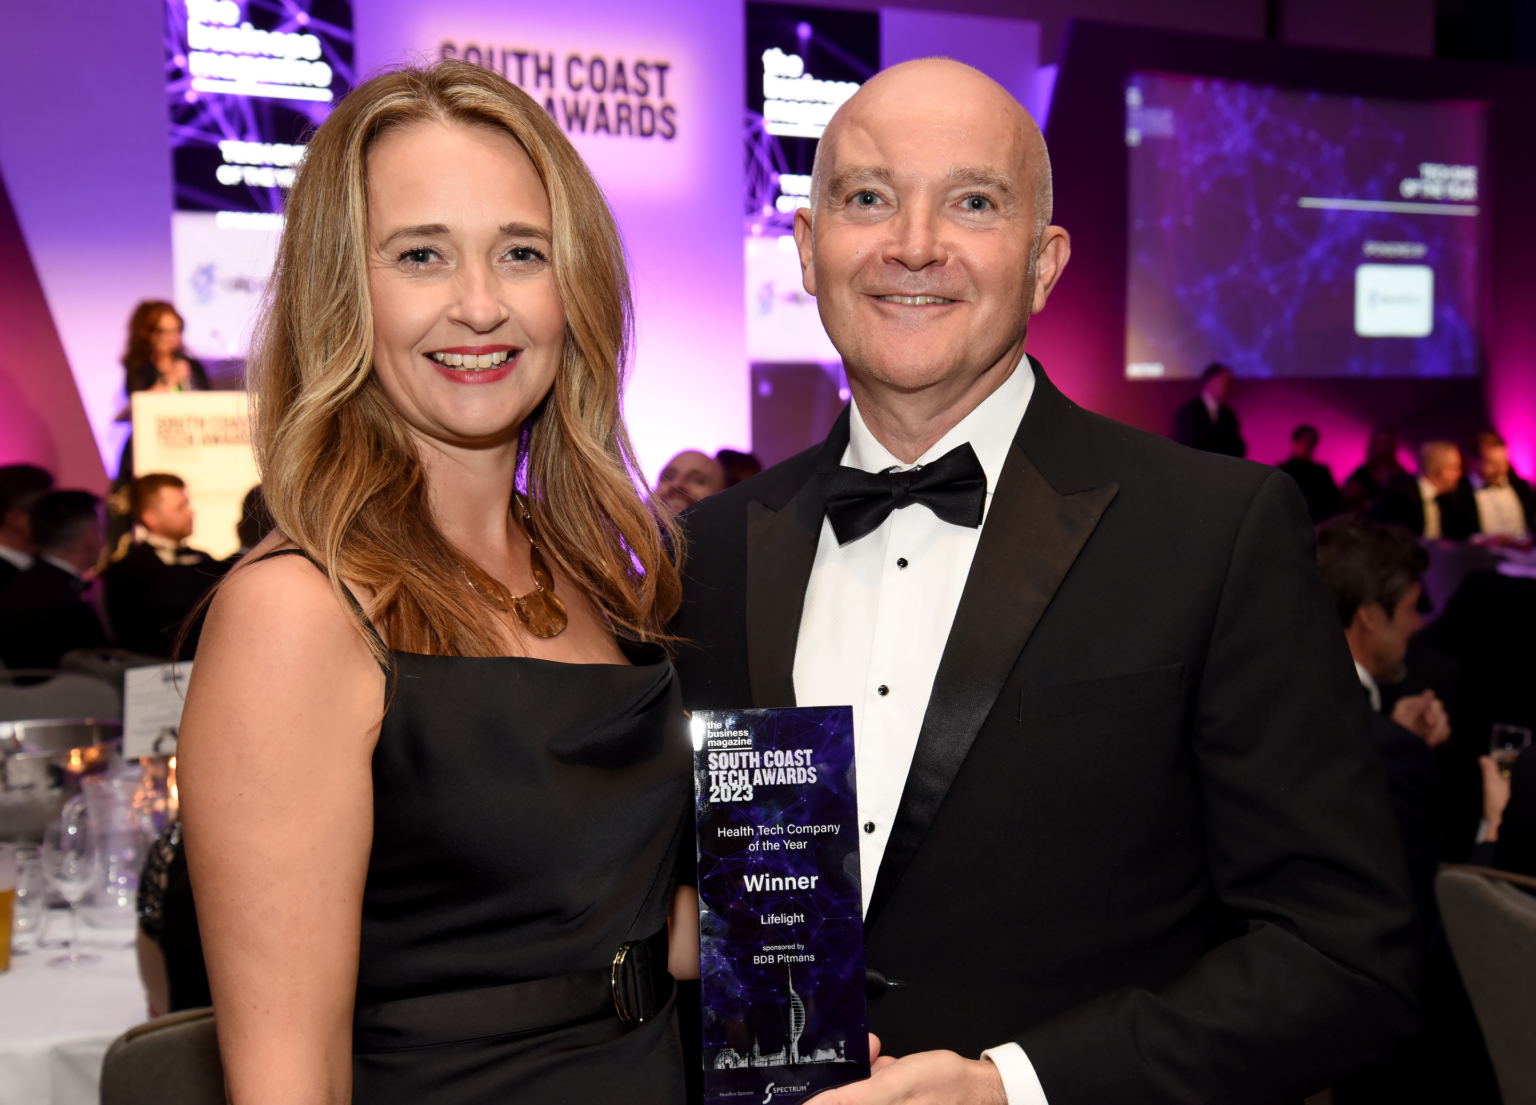 Laurence Pearce and Gina Pelletier of Lifelight, winners of Health Tech Company of the Year